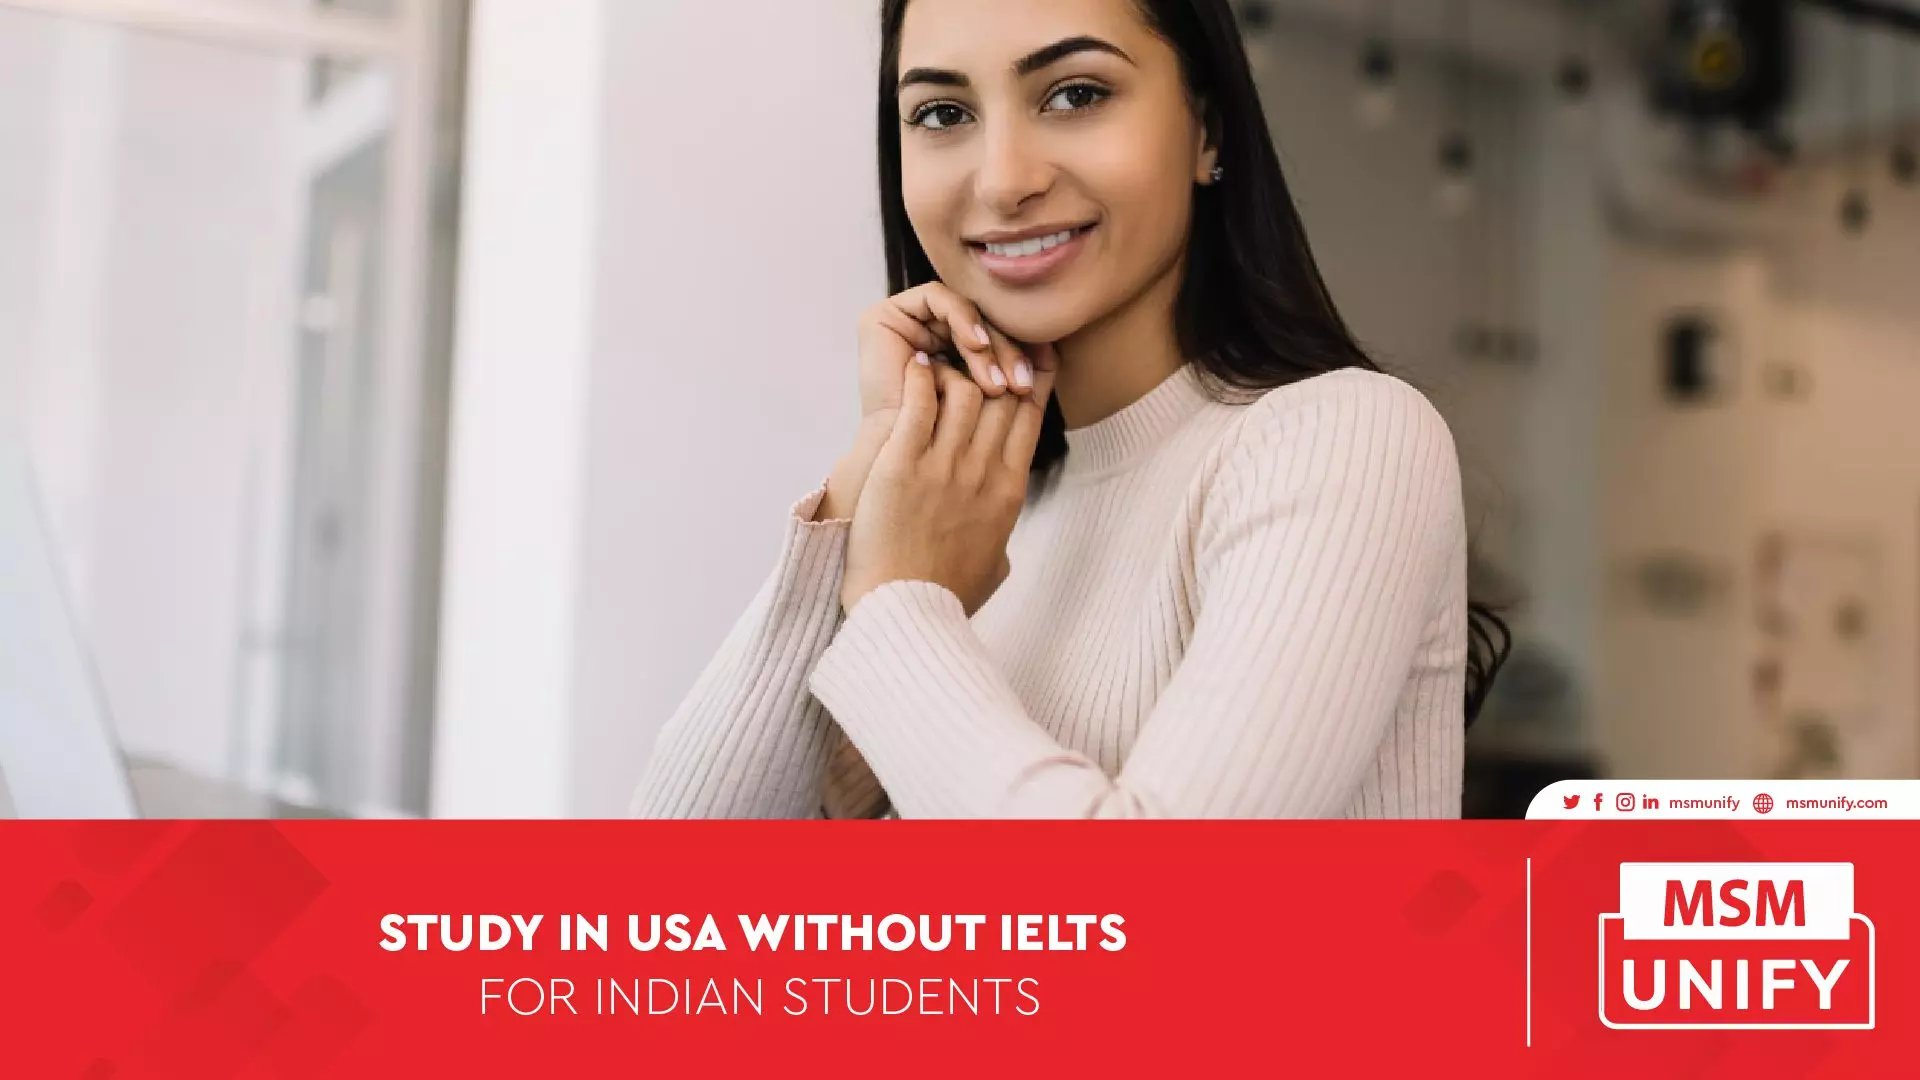 011623 MSM Unify Study in USA Without IELTS for Indian students 01